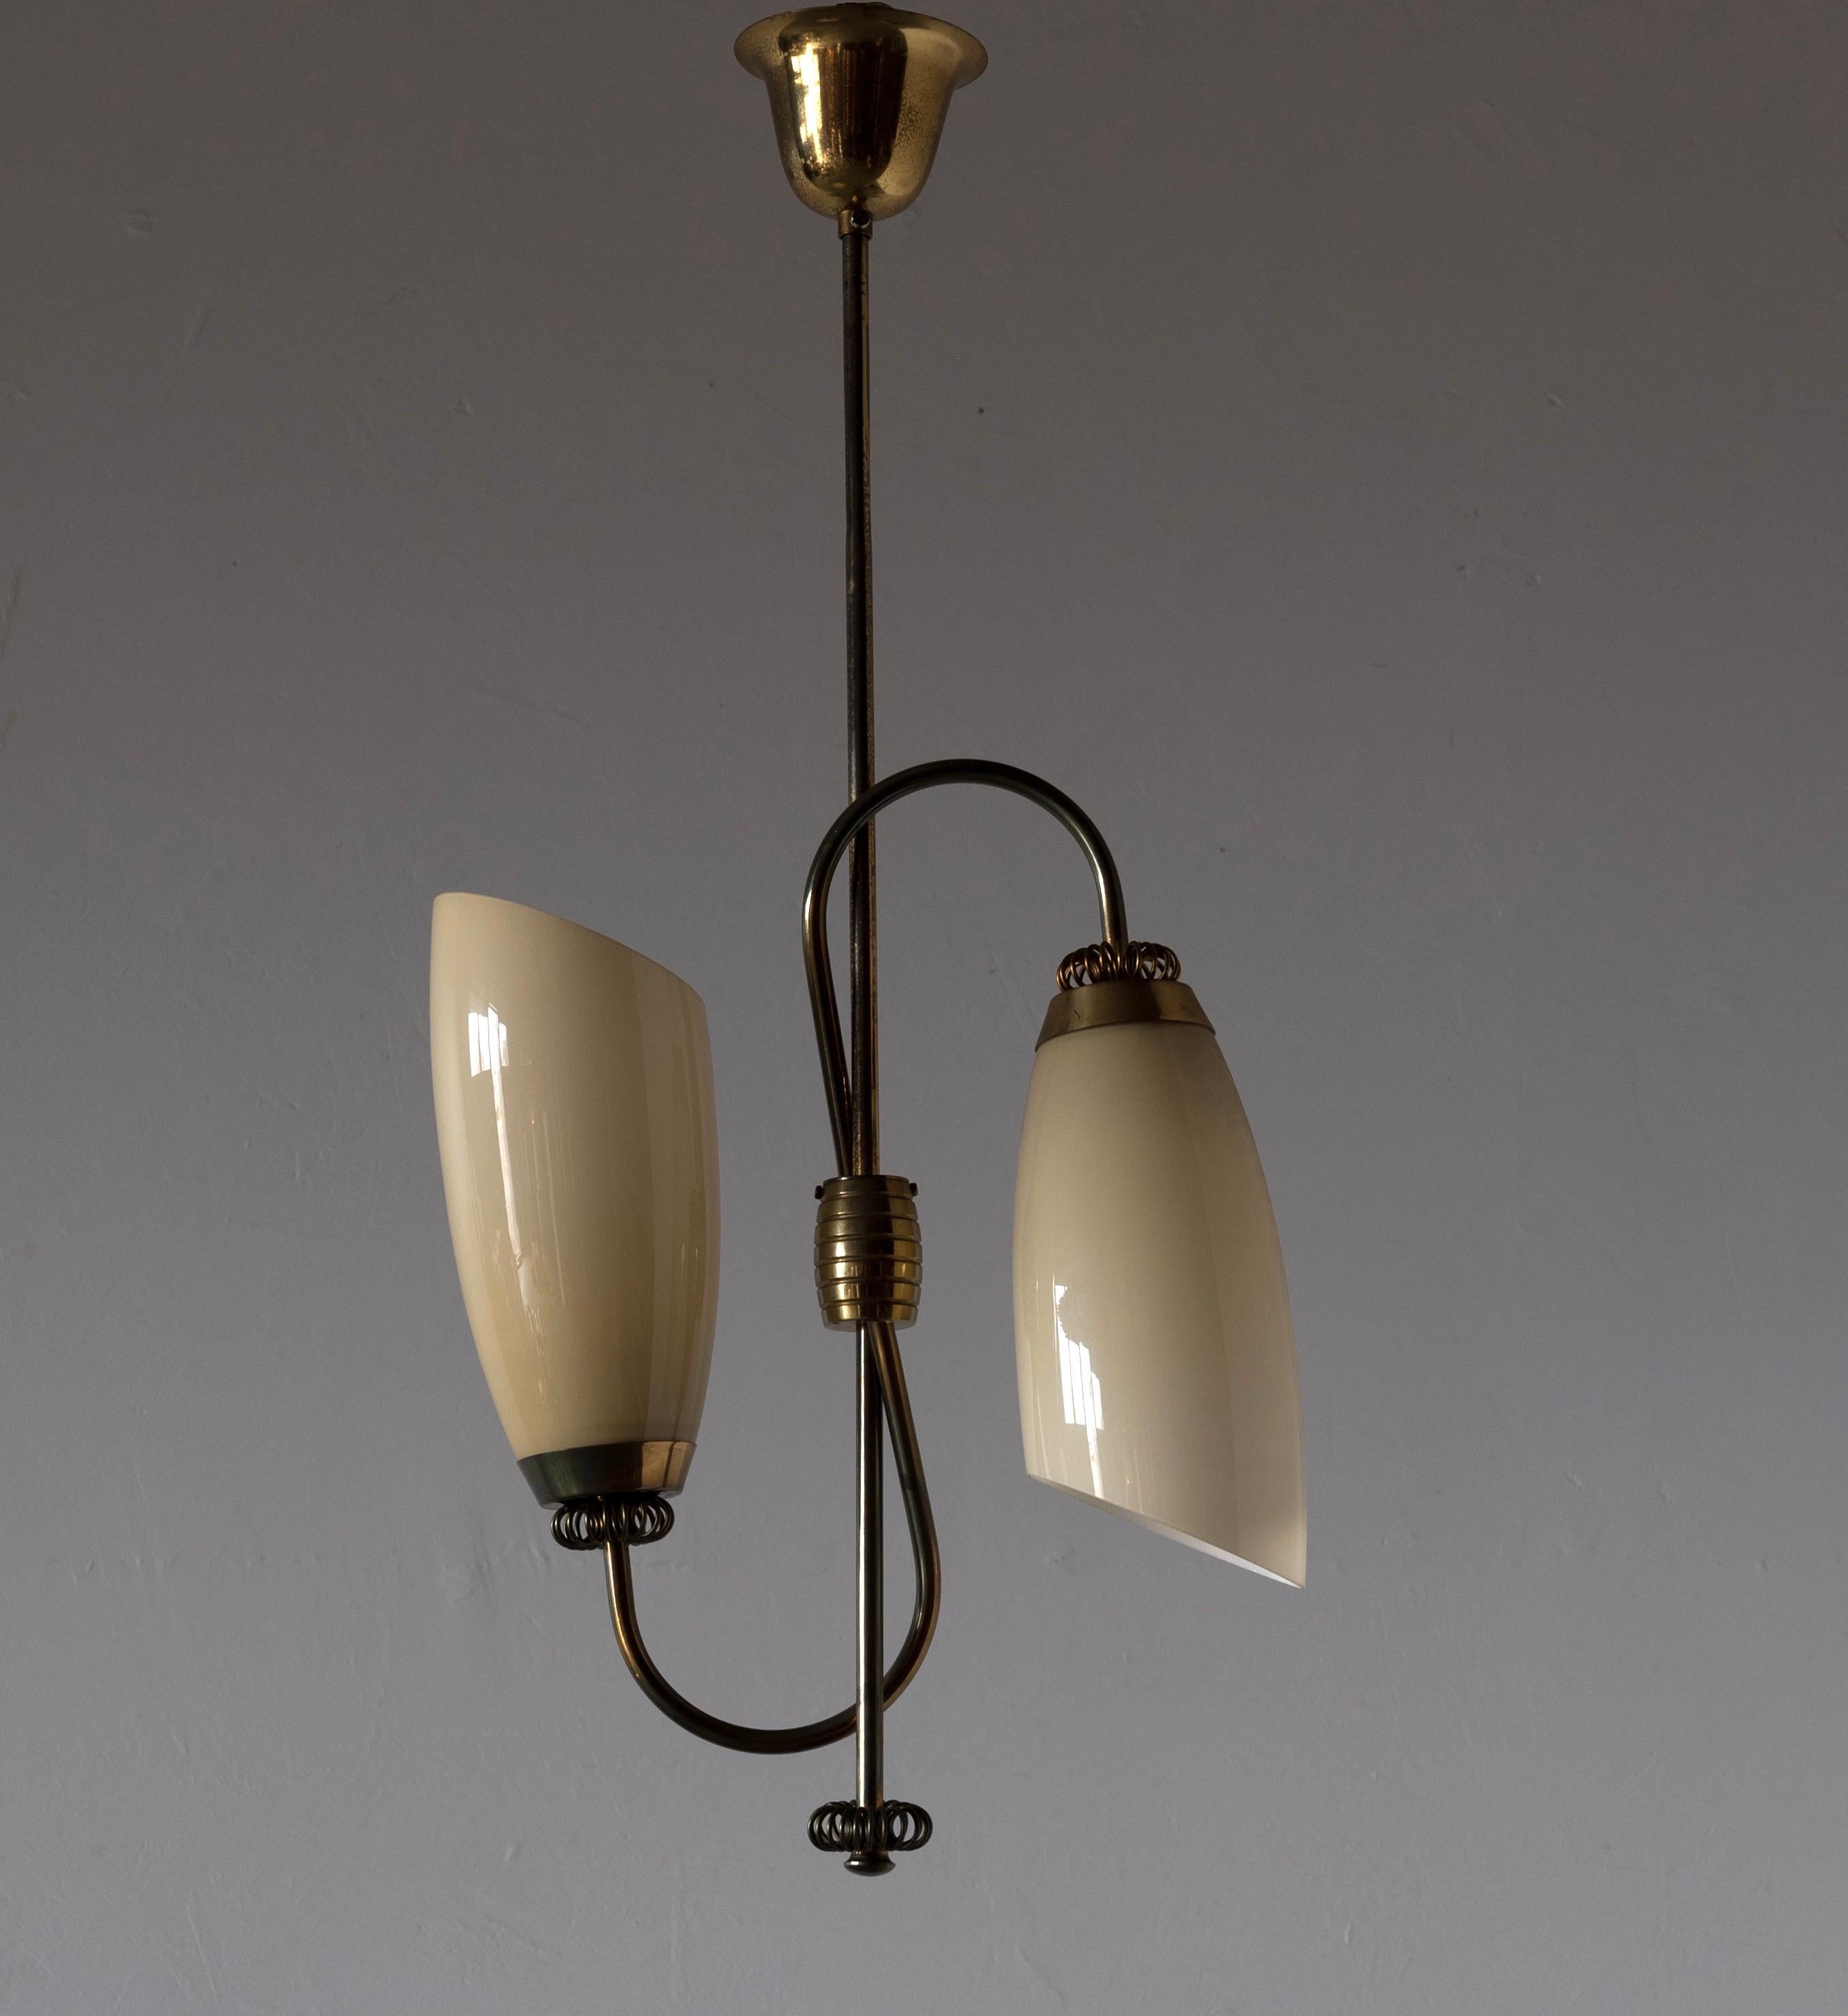 A two-armed pendant / chandelier light, designed and produced in Finland, 1940s. Features milk glass and brass.

Other designers of the period include Paavo Tynell, Alvar Aalto, Lisa Johansson-Pape, J.T. Kalmar, and Josef Frank.